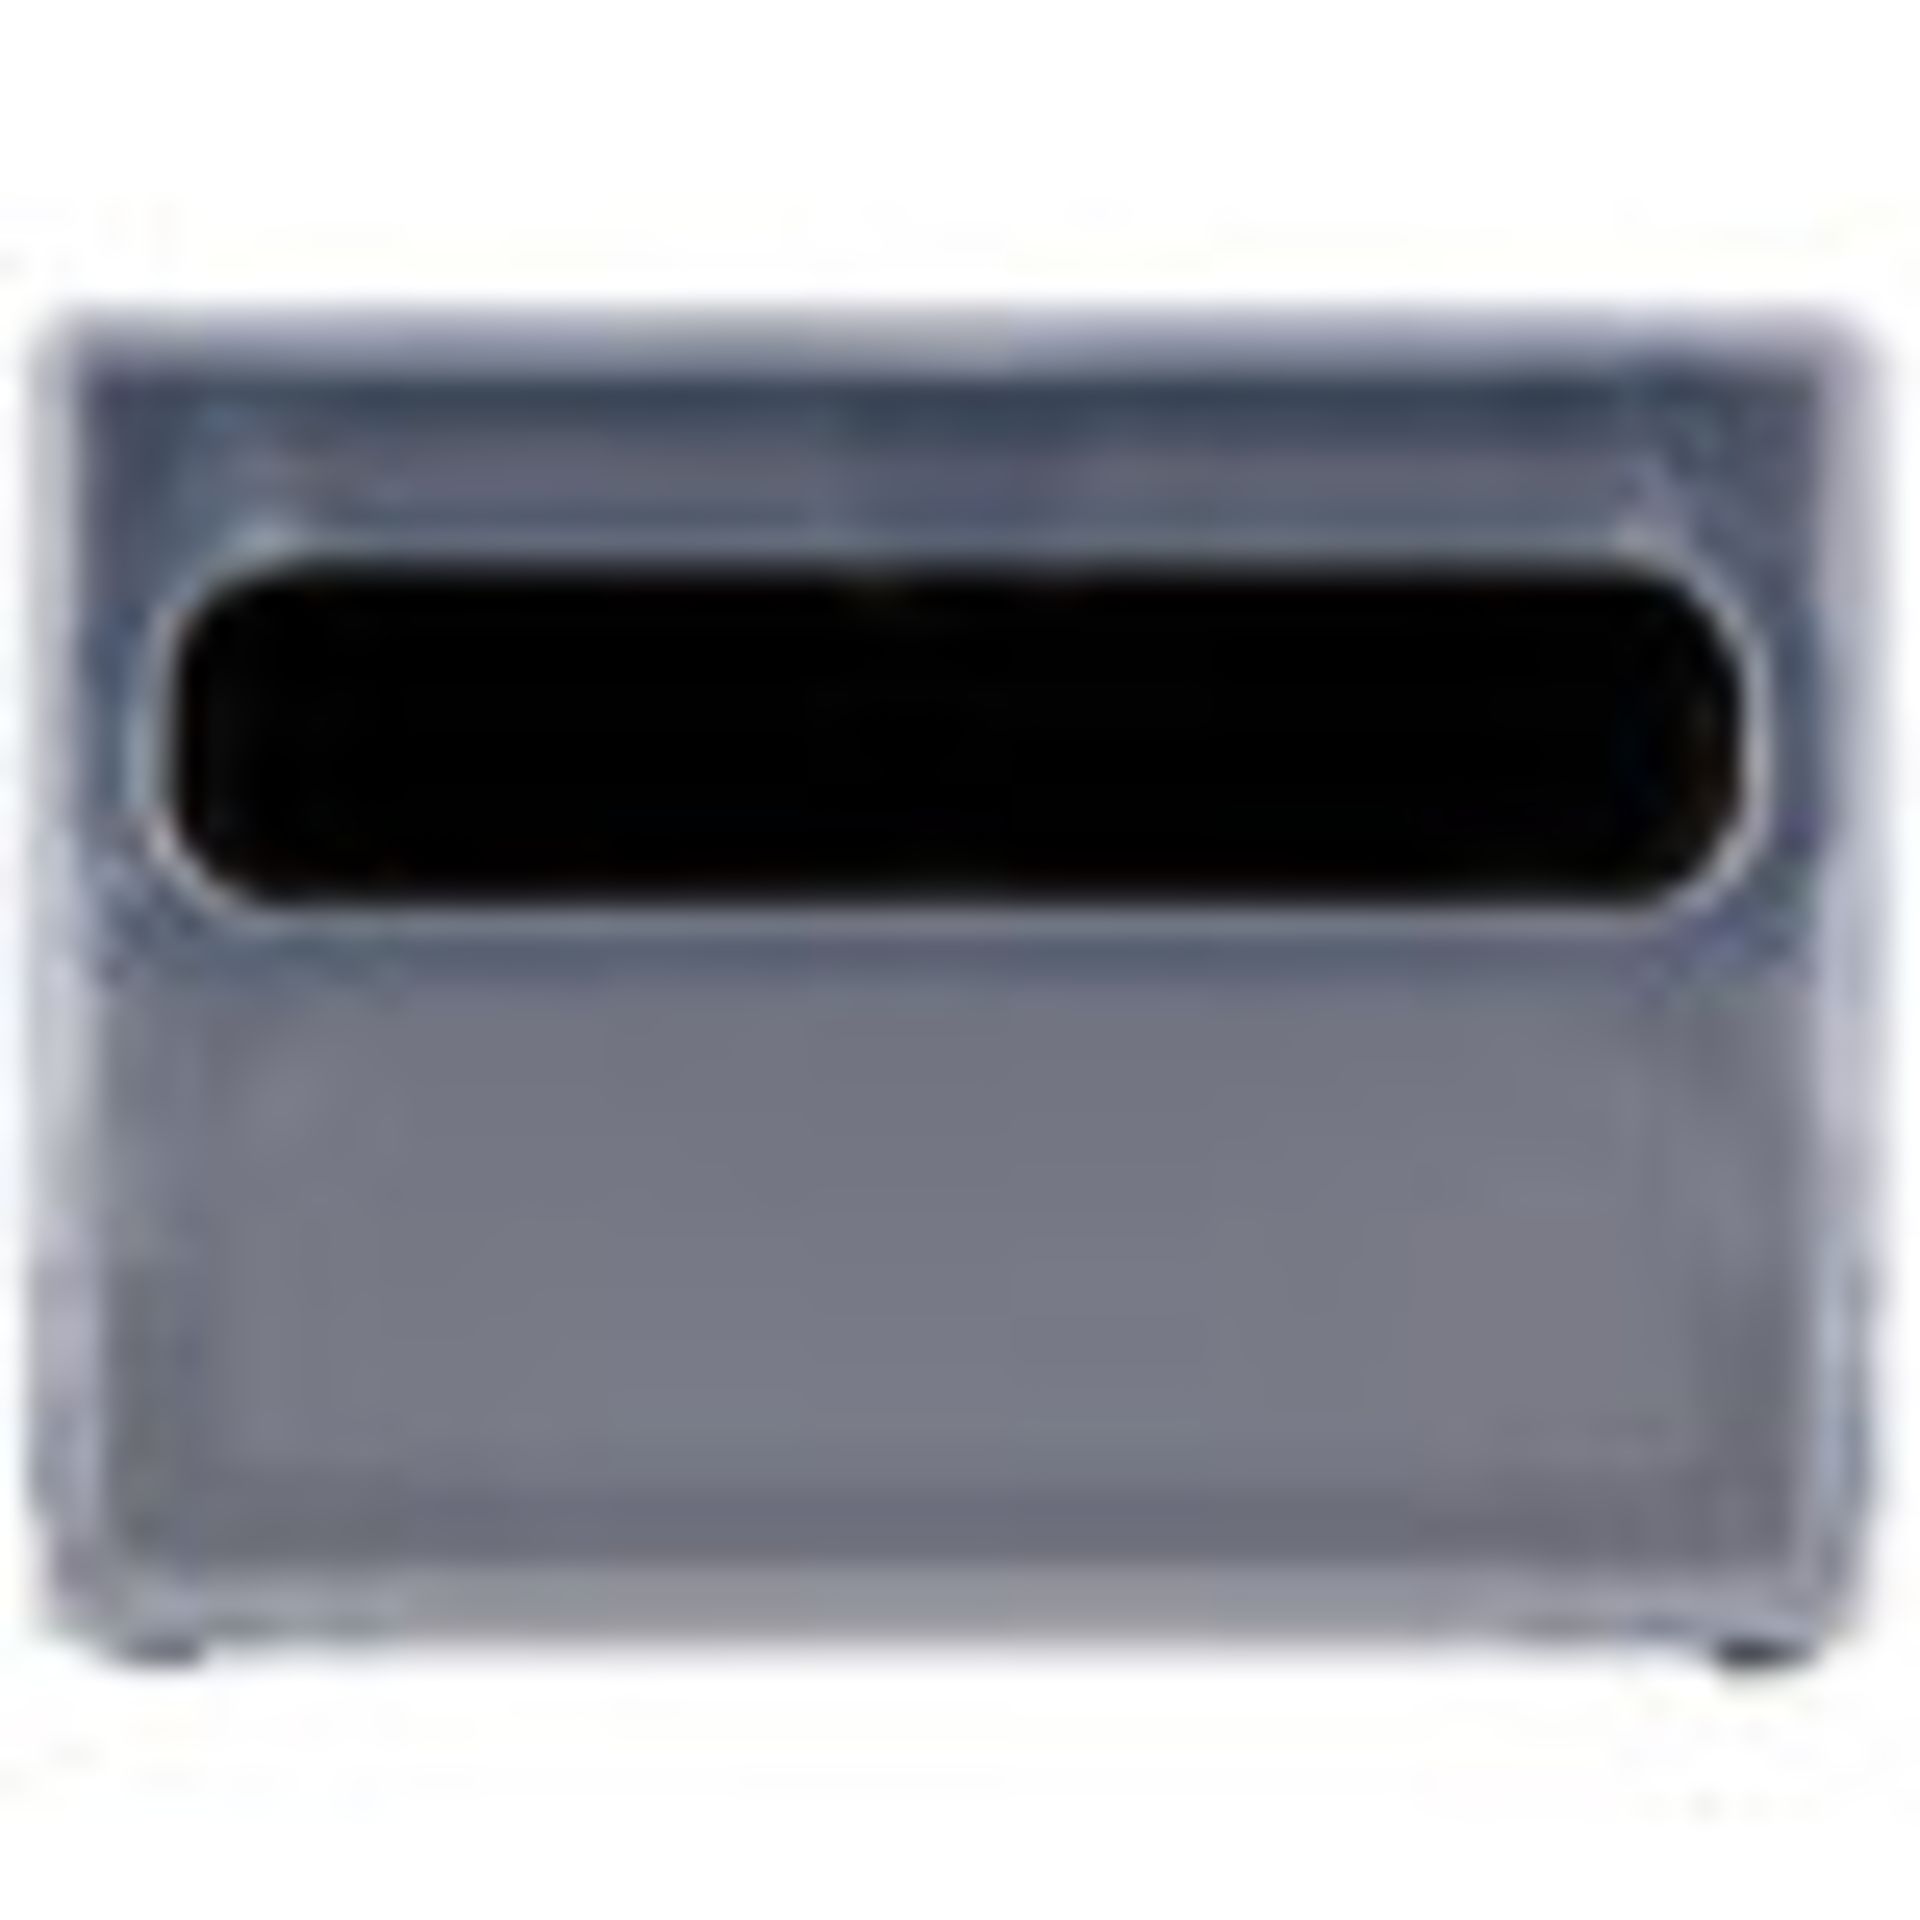 8 x Traex 7512-06 Black One Sided Countertop Fullfold Napkin Dispensers with Clear Faceplates - - Bild 11 aus 12